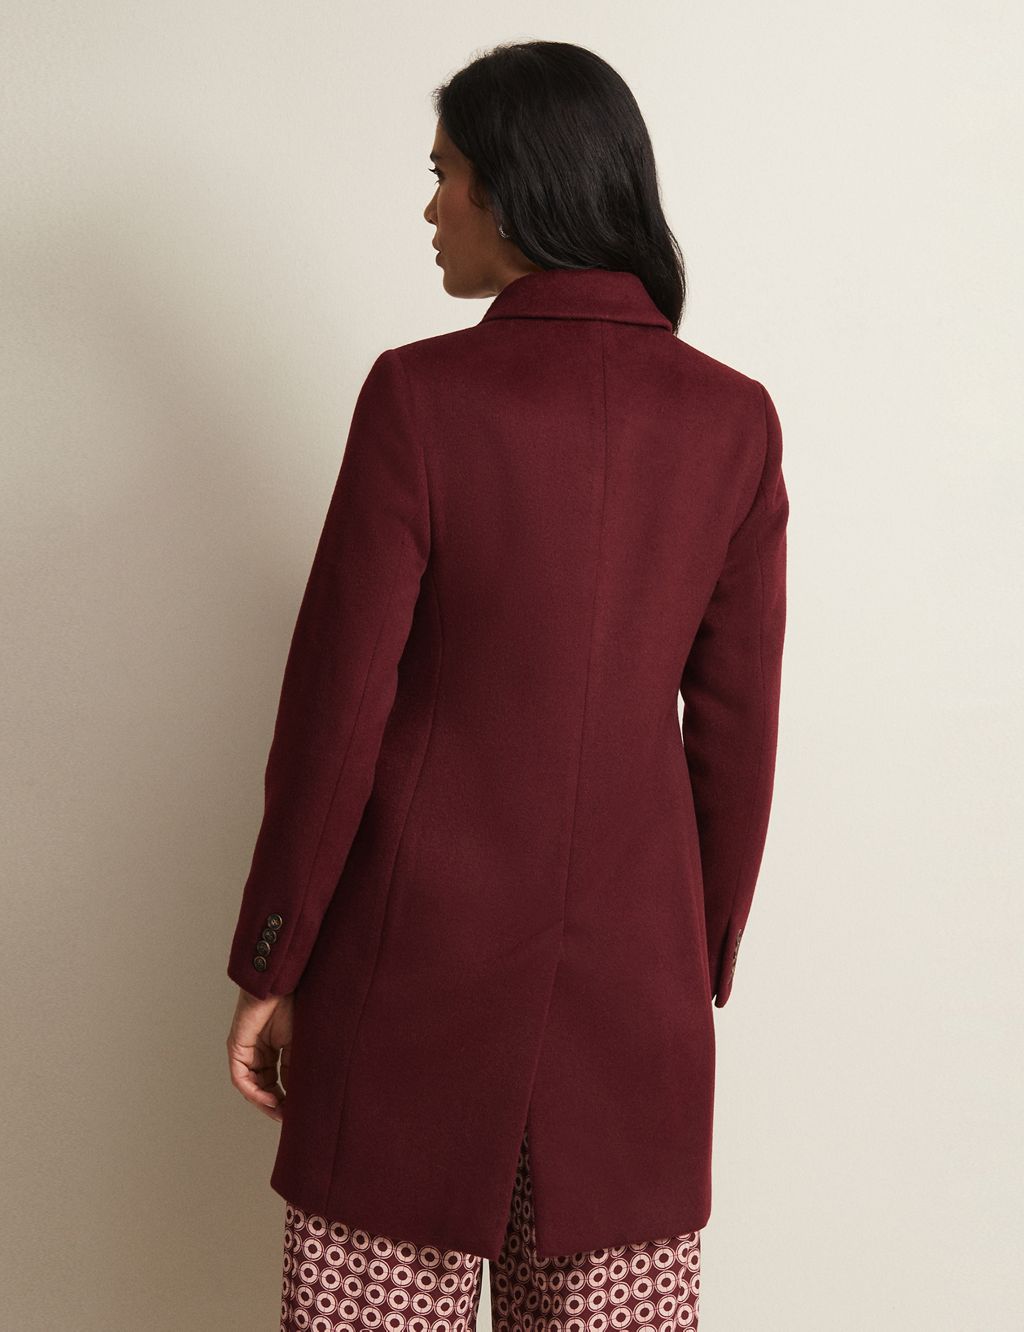 Wool Blend Single Breasted Tailored Coat image 5